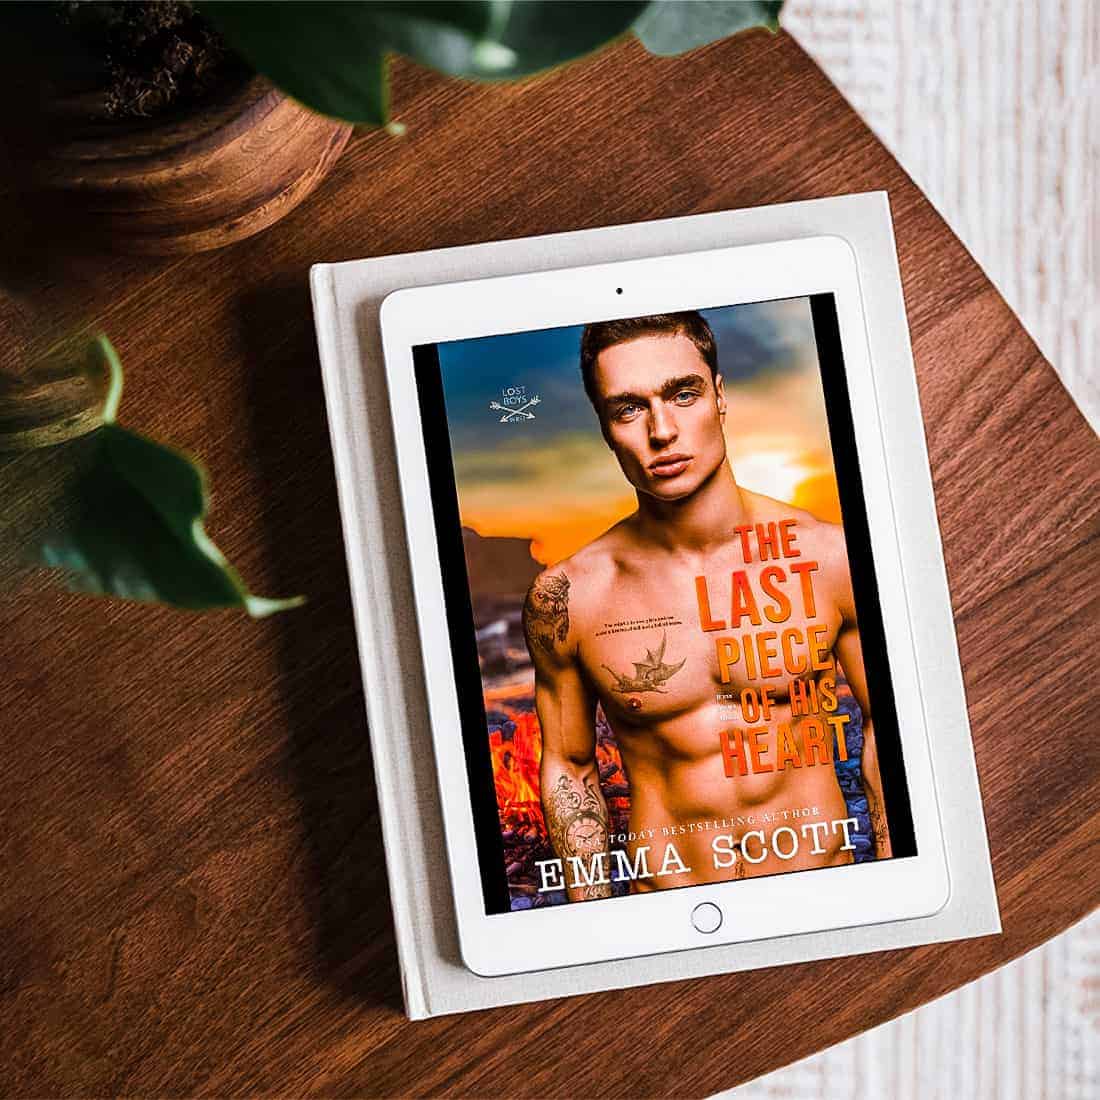 The Last Piece of His Heart by Emma Scott is the phenomenal third and final book in the Lost Boys series and an epic heart-wrenching and emotional romance